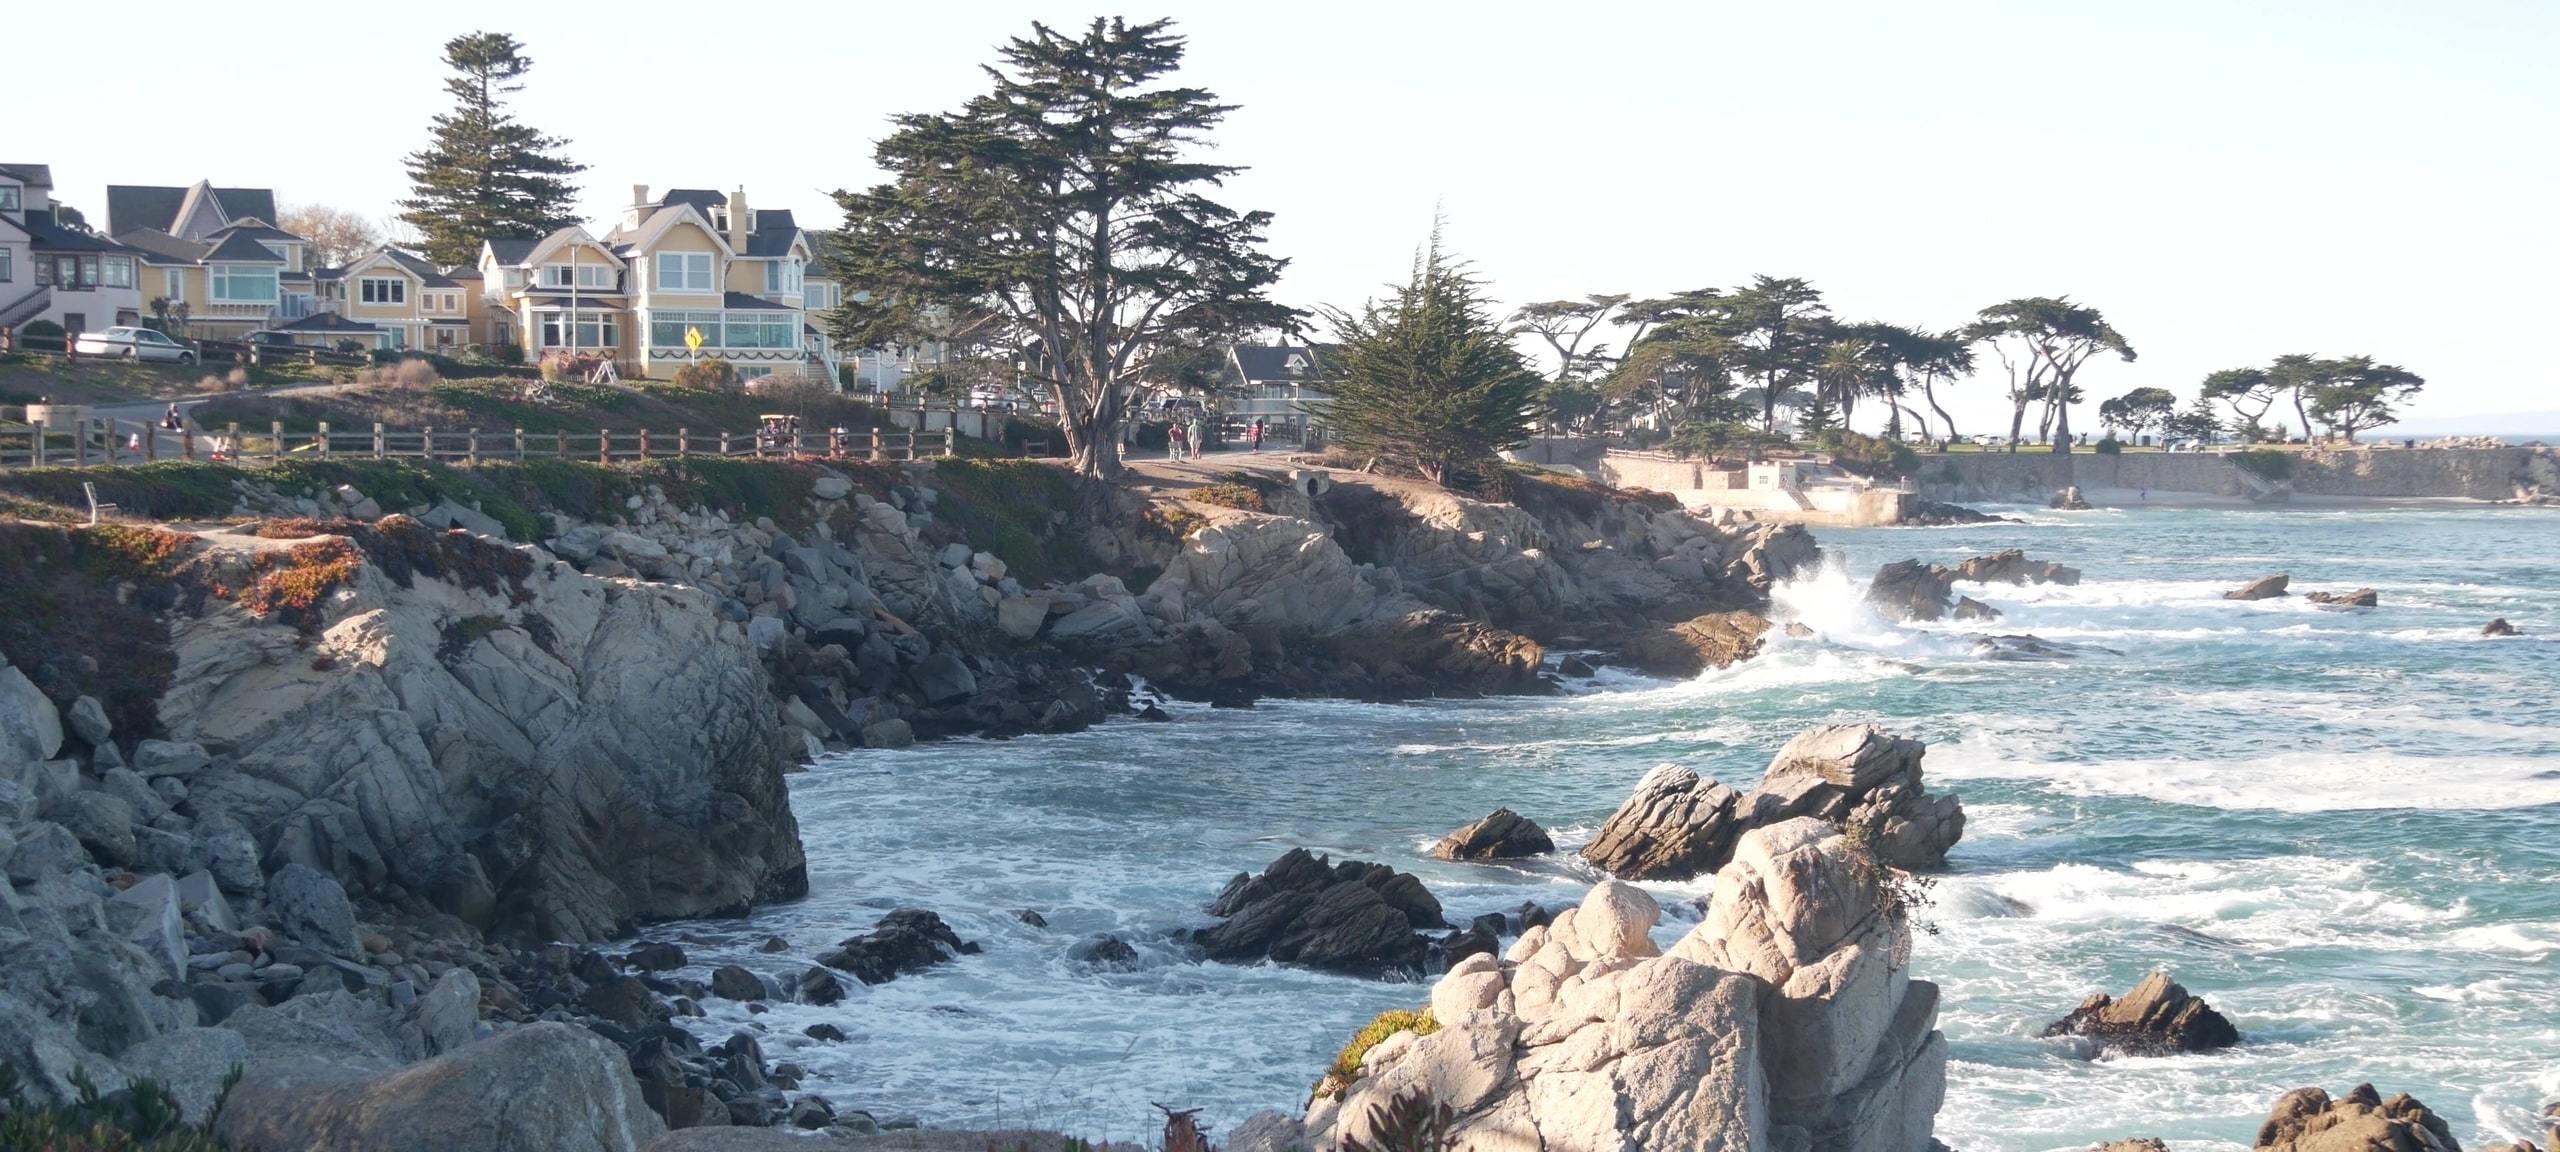 Waves crashing on rocky Monterey Bay area cliffs with homes on shore